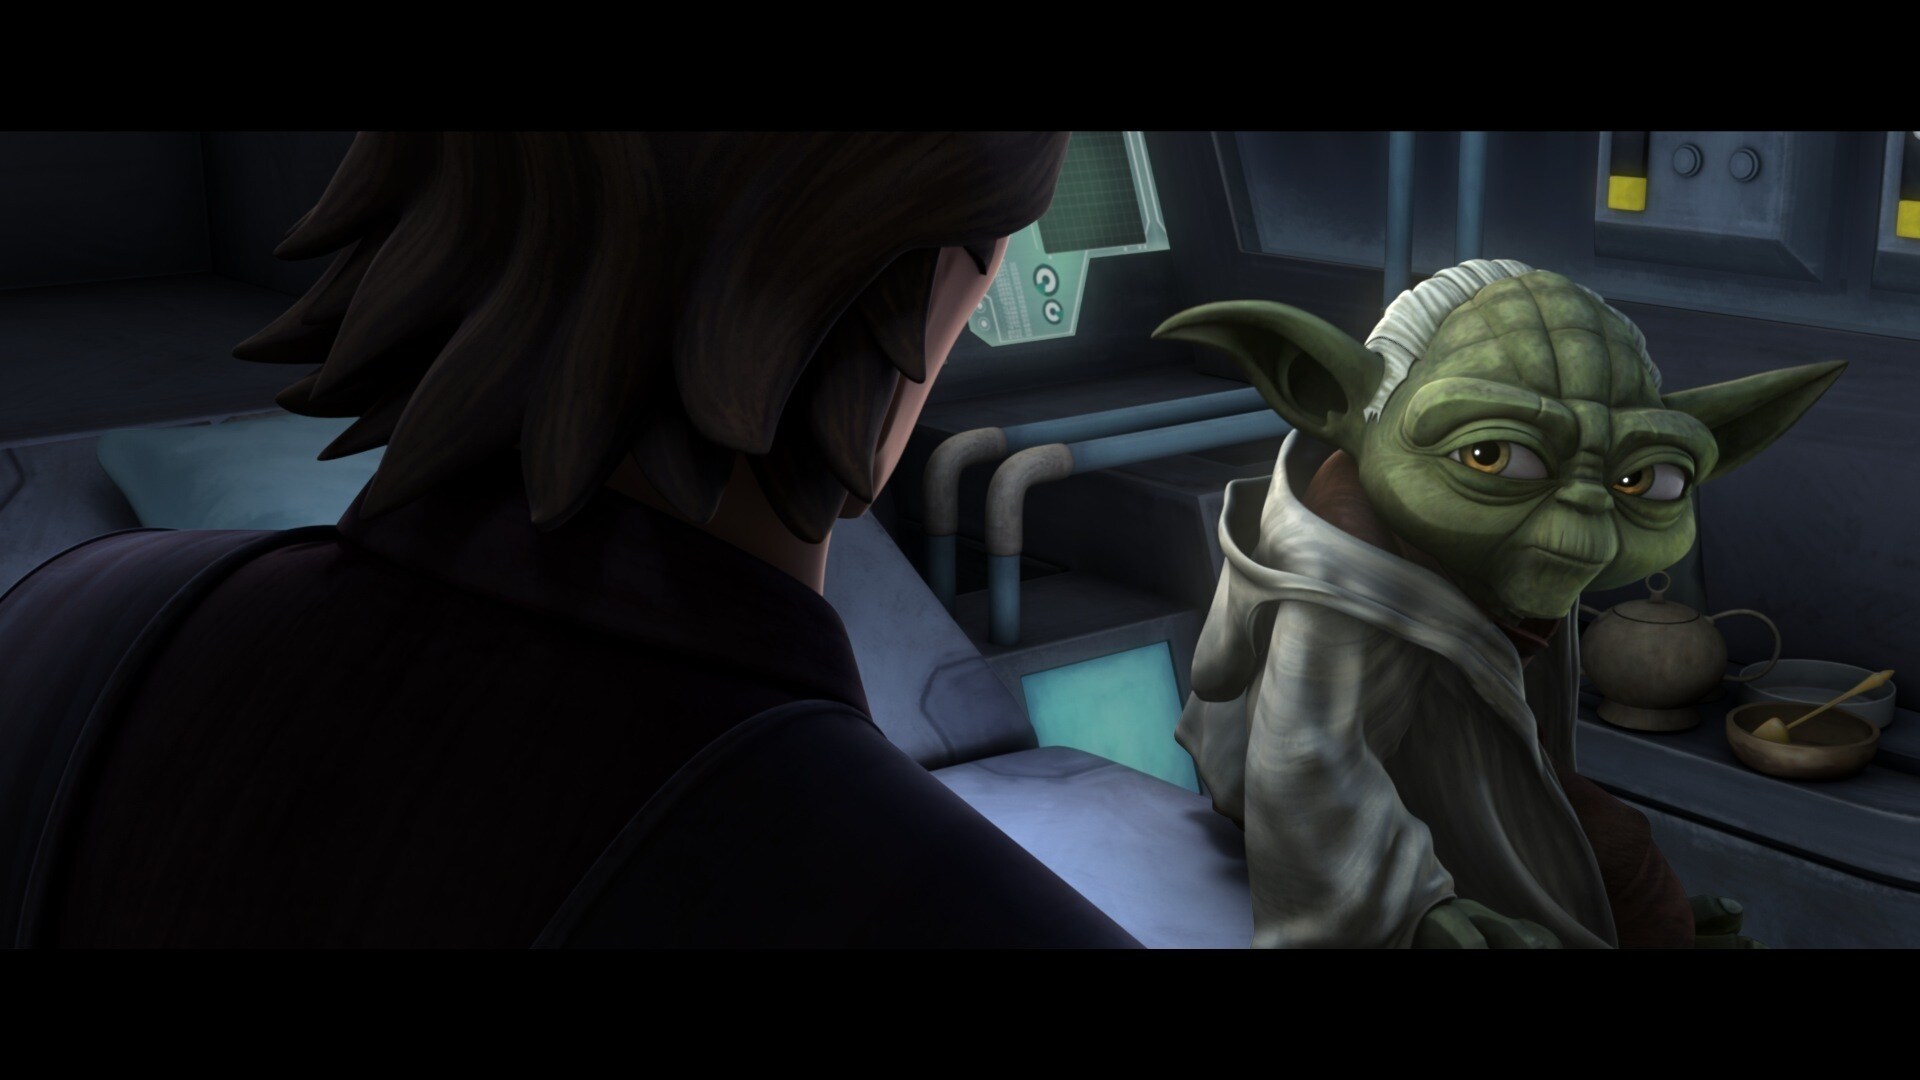 As Yoda recovers in bed, he calls for Anakin Skywalker to come to his side. With a grin, Yoda tel...